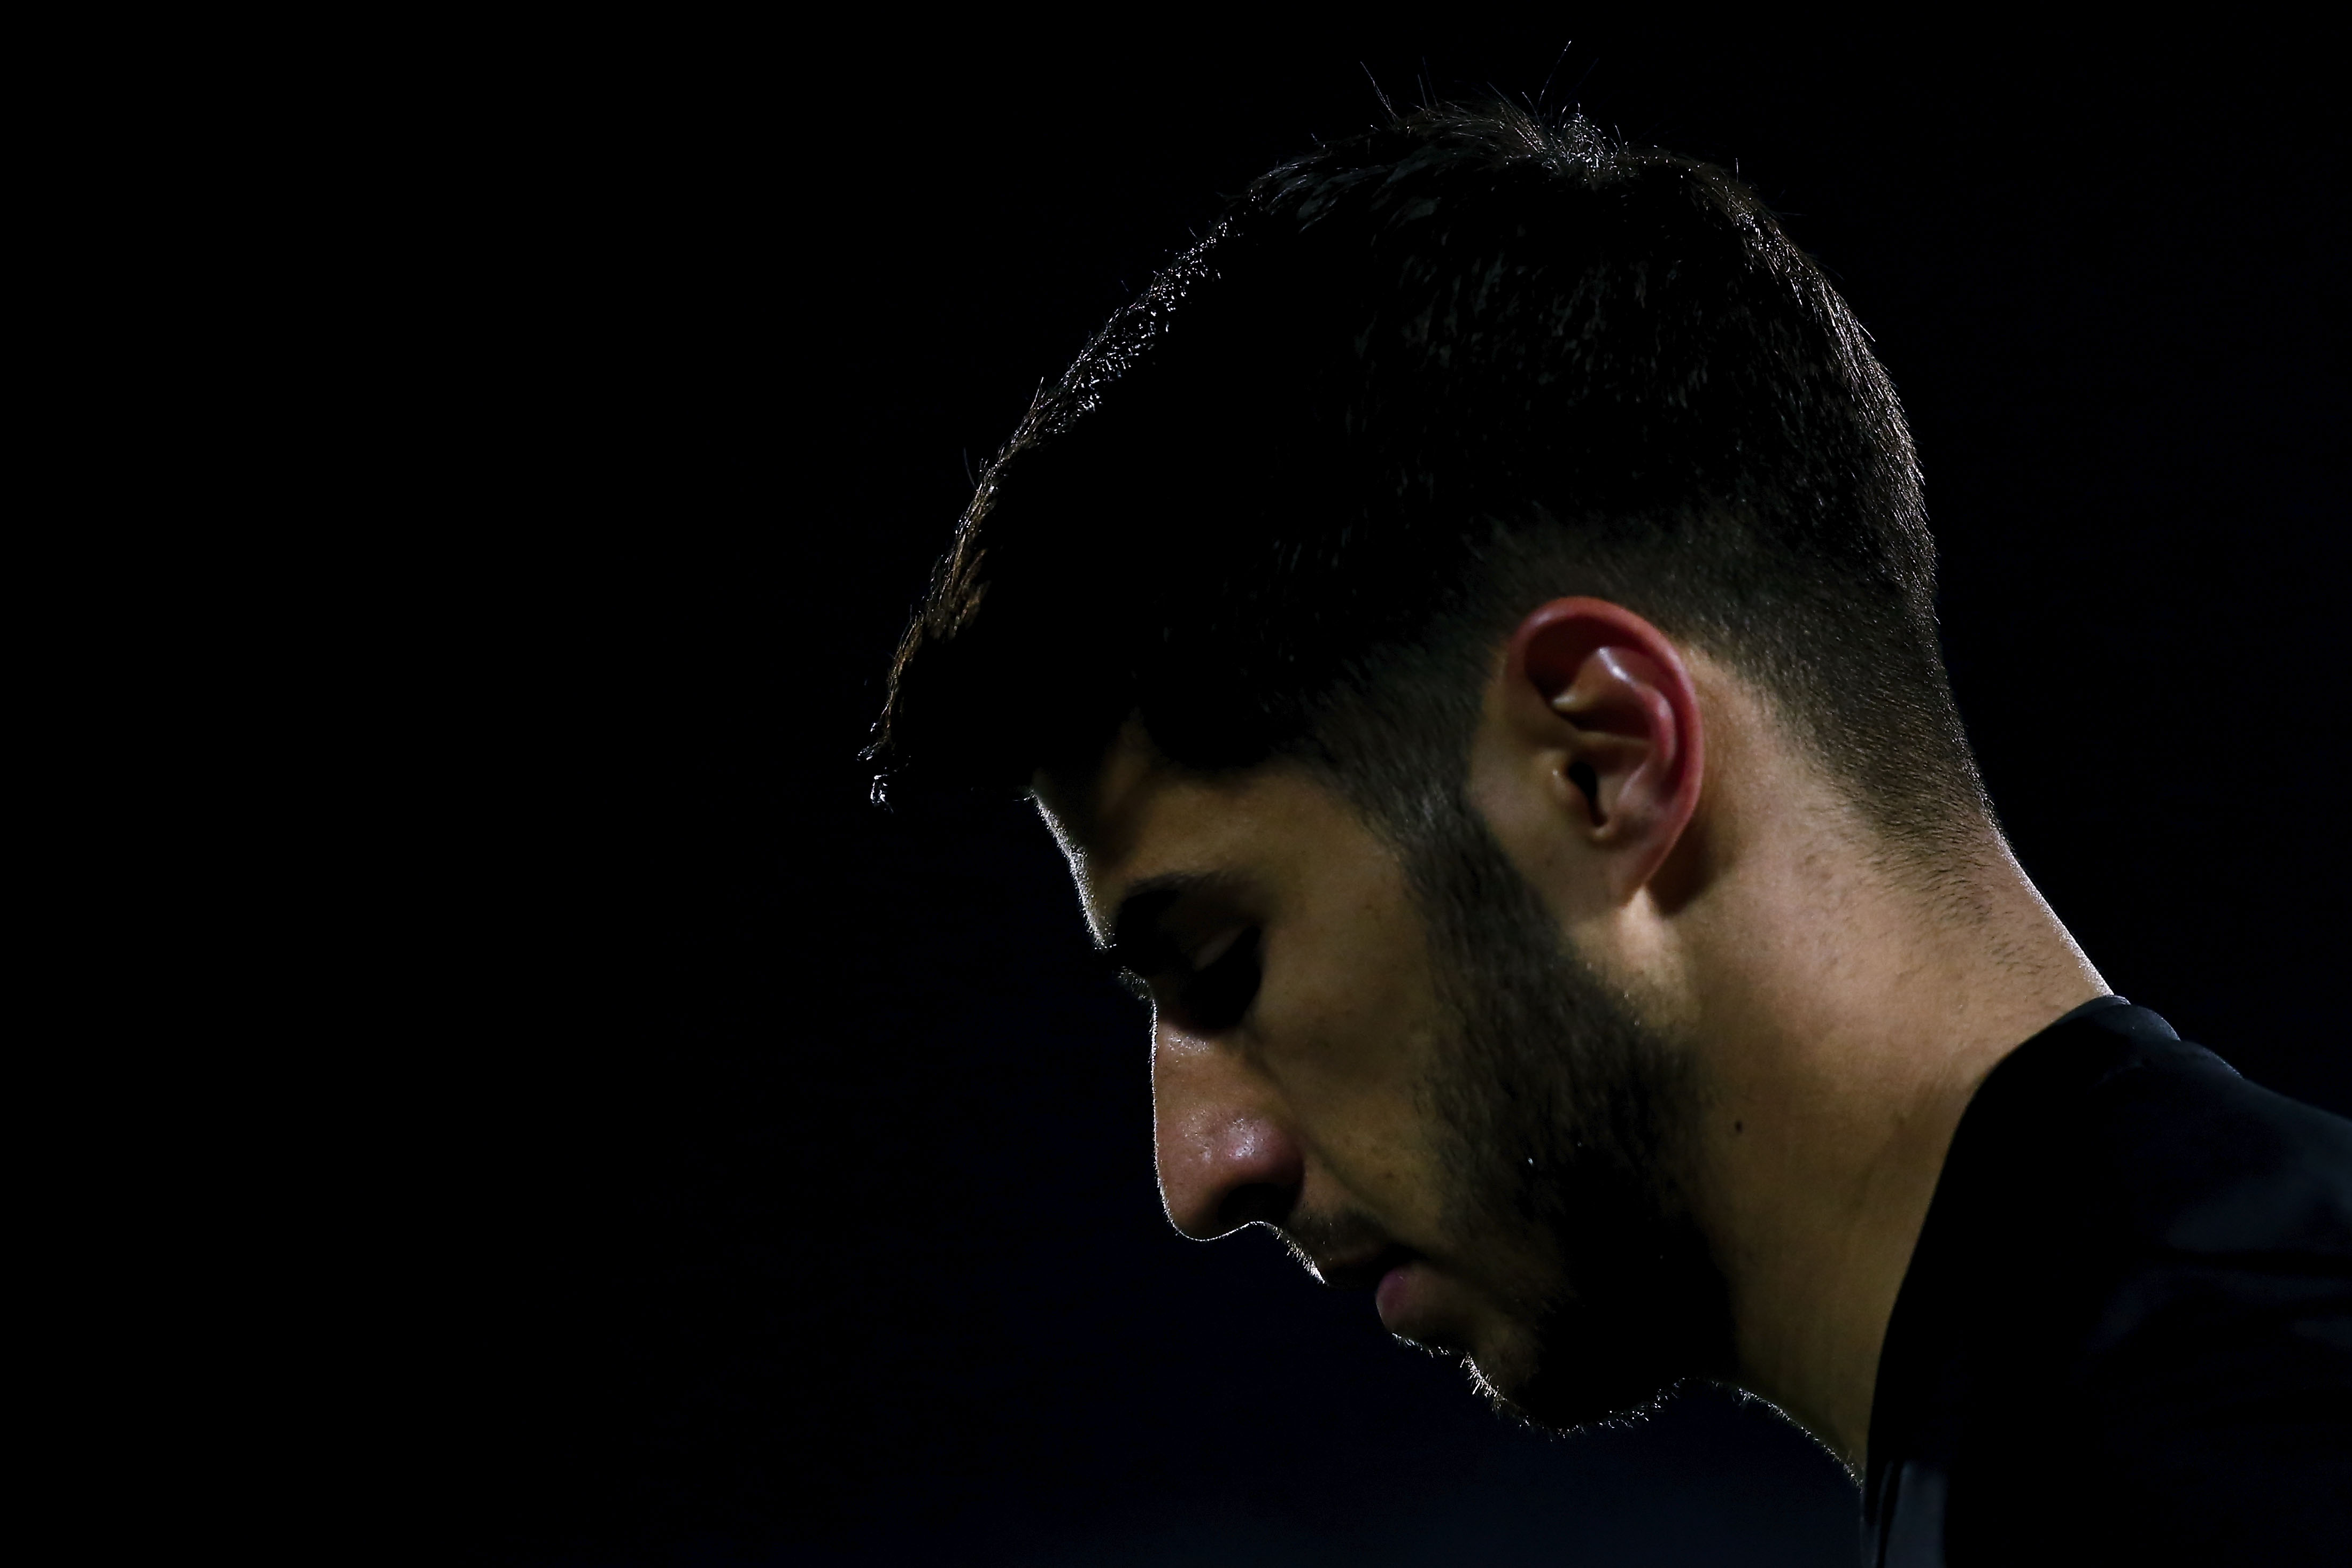 A long-term knee injury plagued Asensio at Real Madrid. (Photo by Gonzalo Arroyo Moreno/Getty Images)